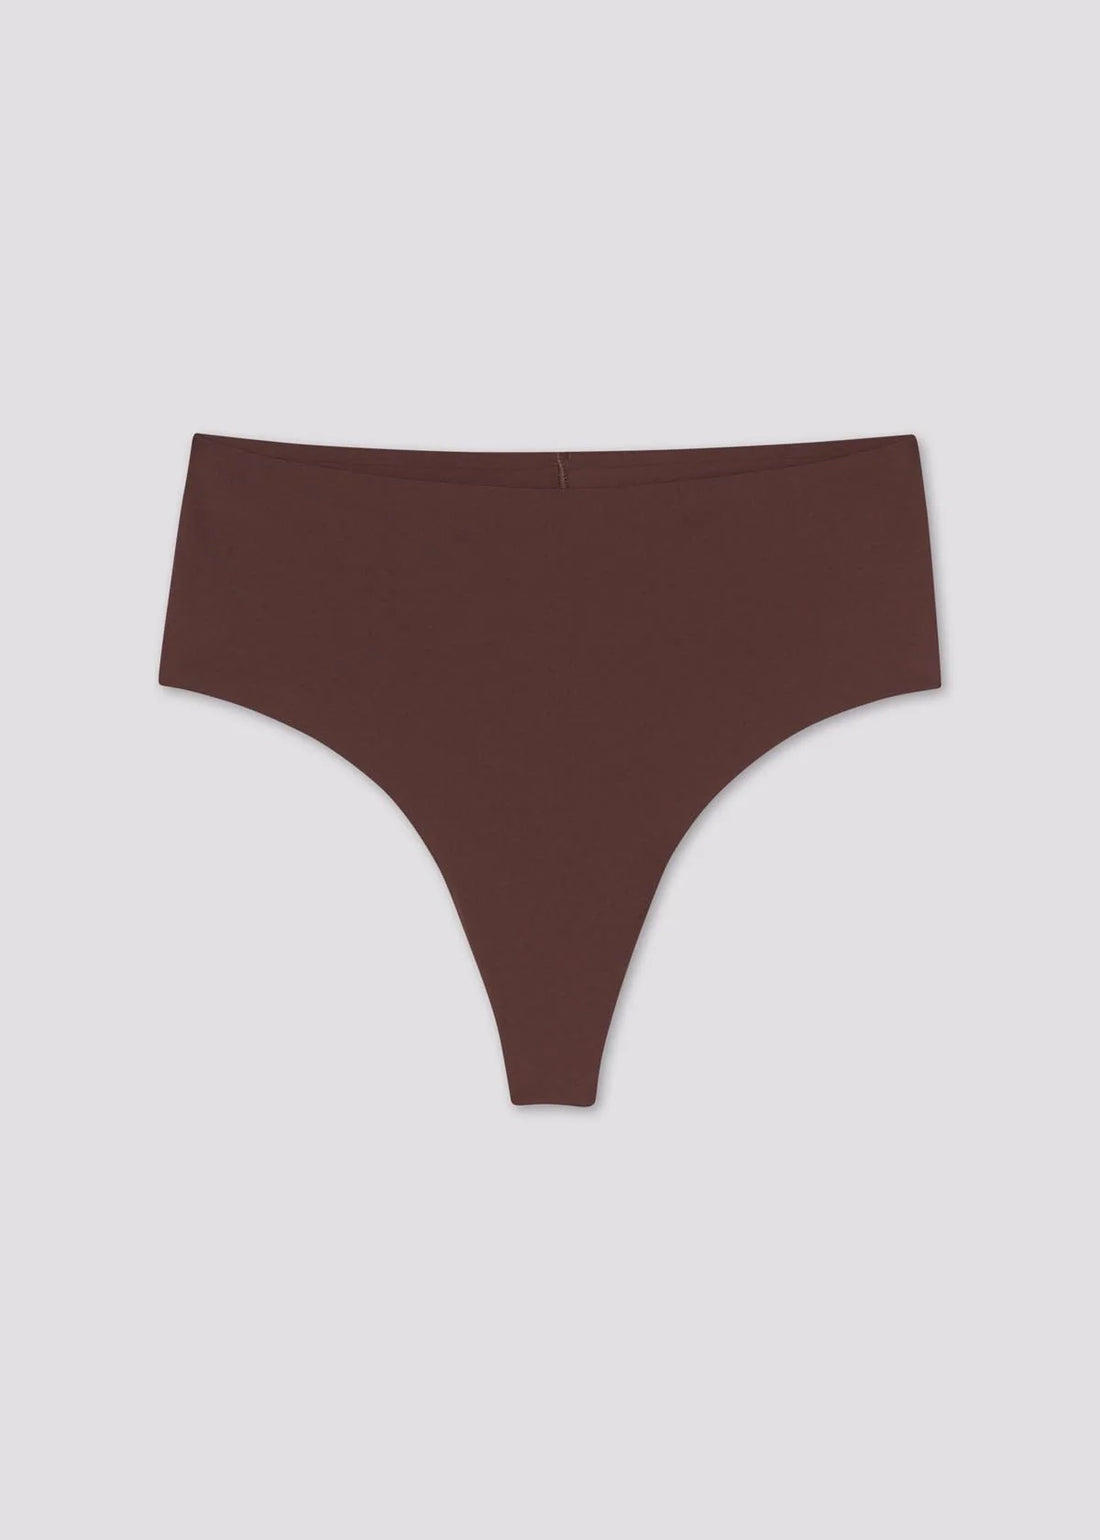 Girlfriend Collective High-Rise Thong in Espresso